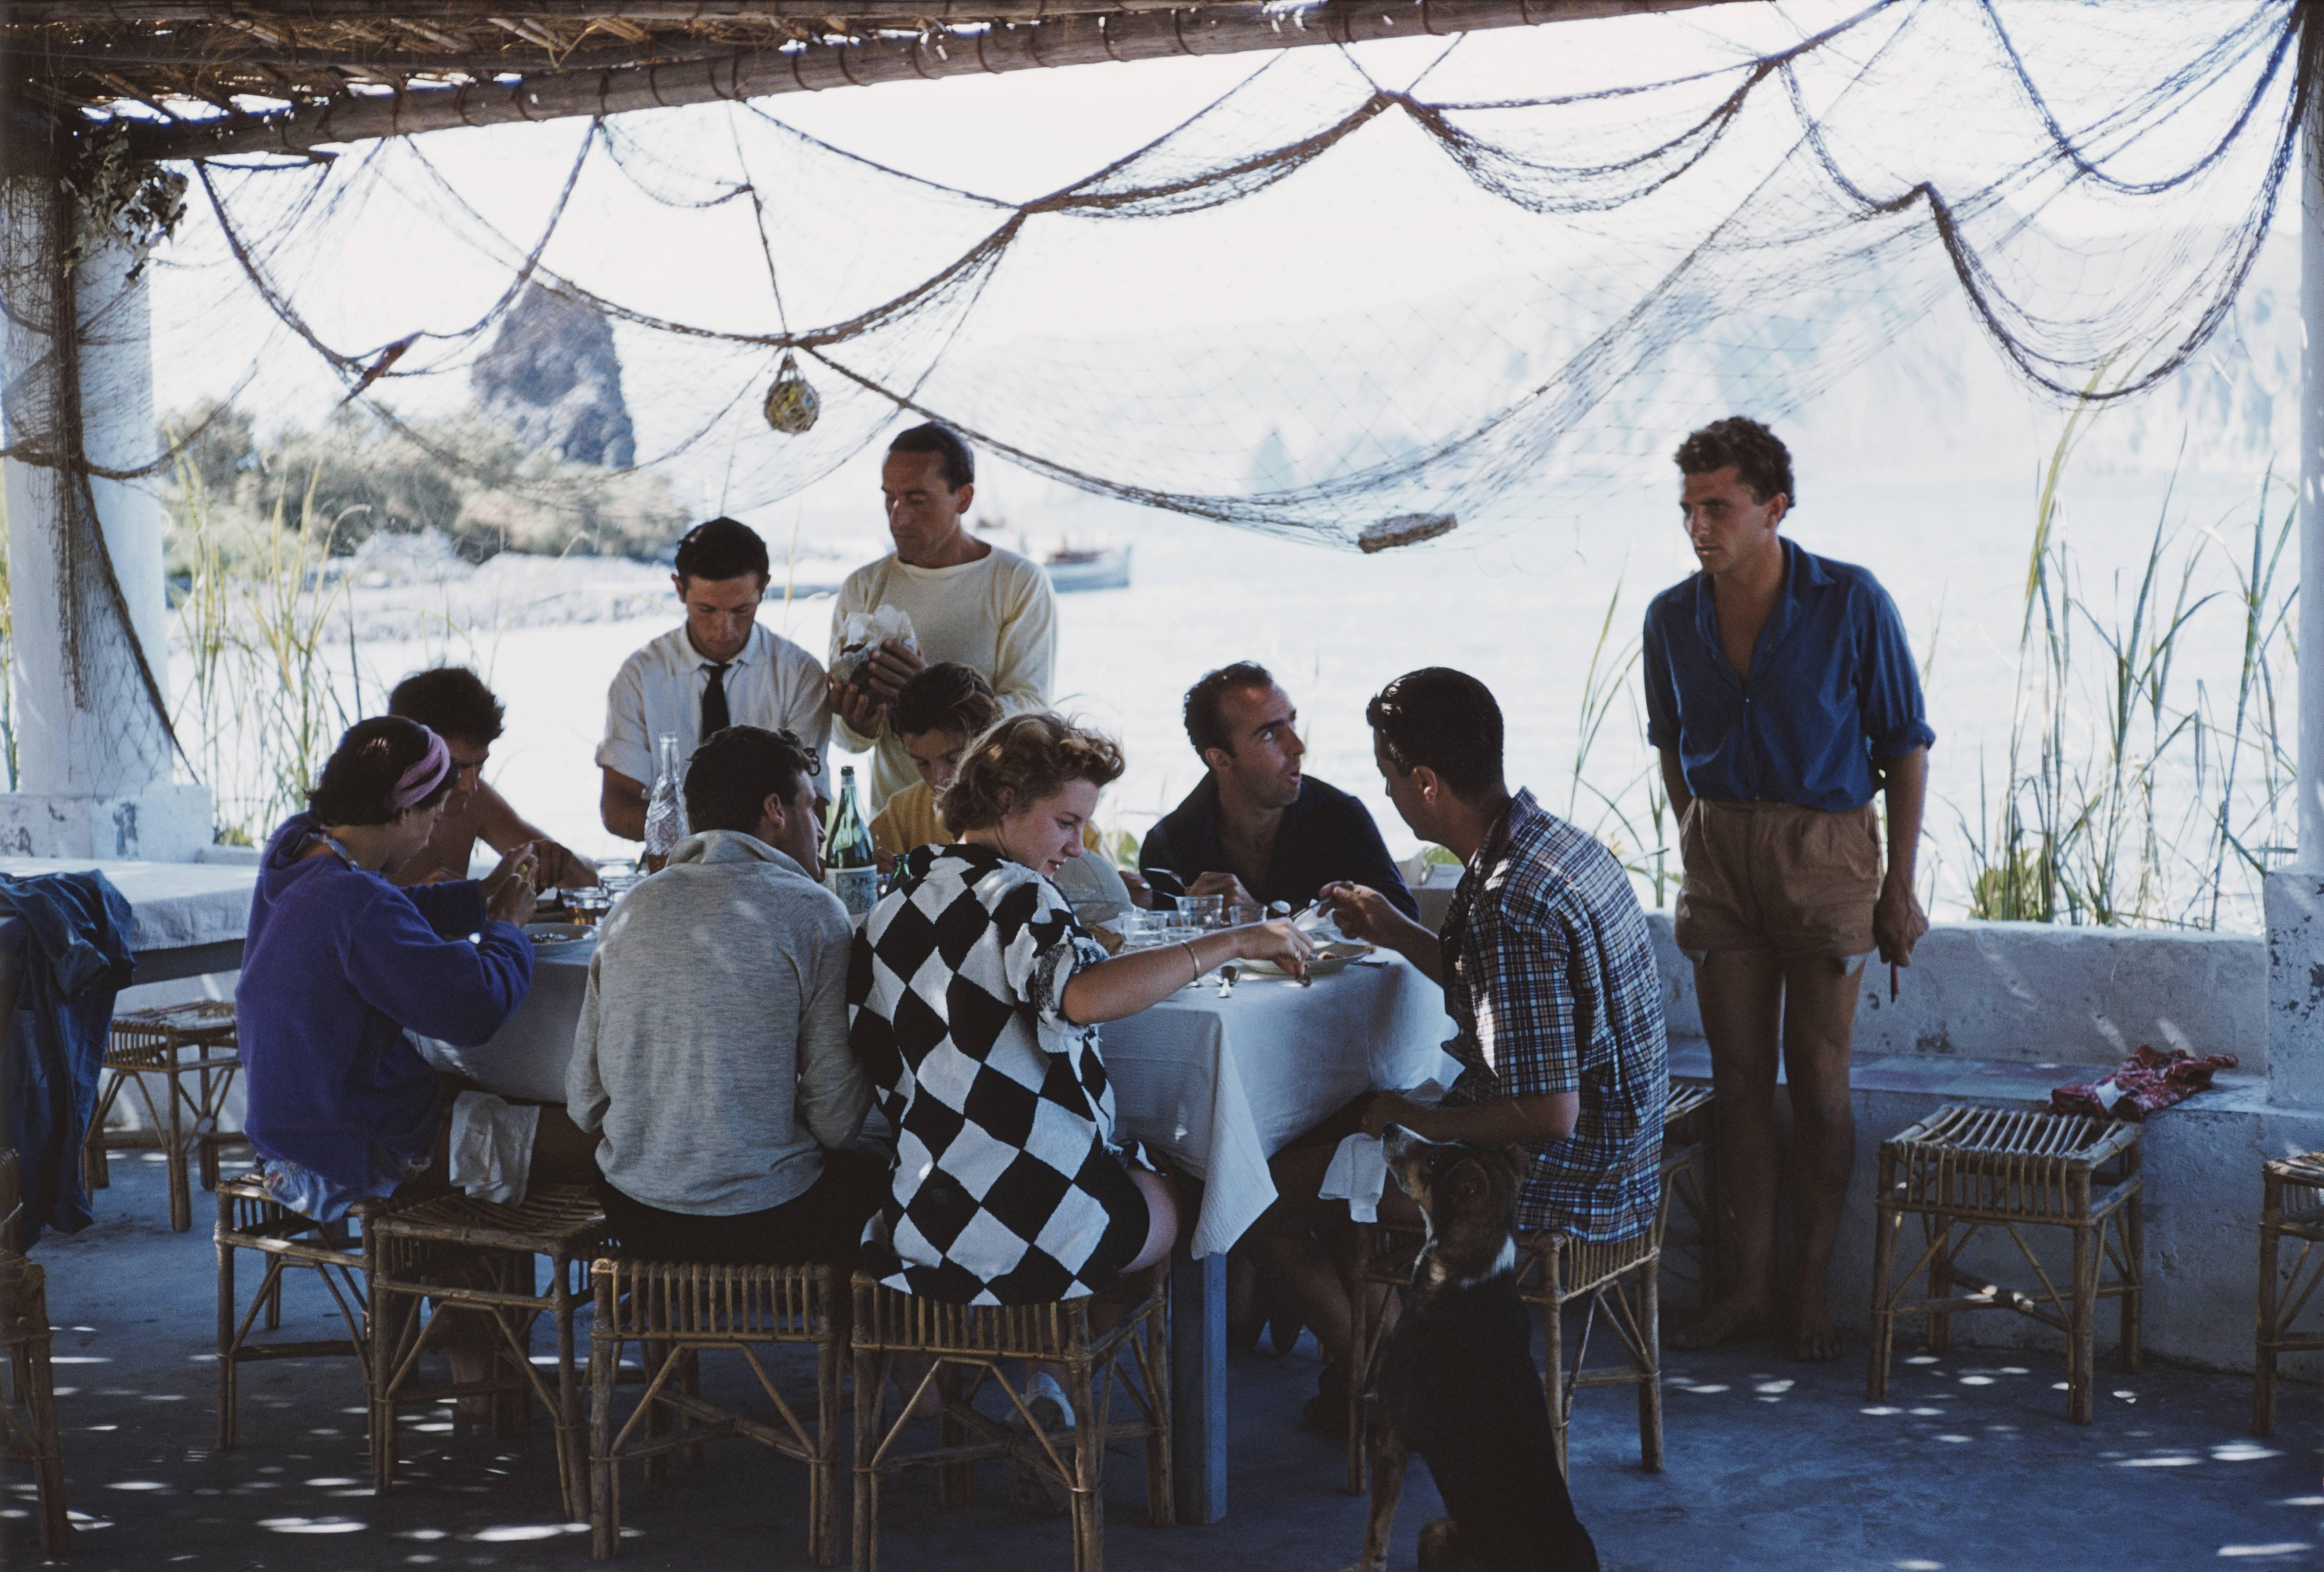 Friends on holiday in Sicily, Italy 1954. (Photo by Slim Aarons/Getty Images)

C-type print from the original transparency held at the Getty Images Archive, London. Numbered and stamped by The Slim Aarons Estate.  Certificate of Authenticity